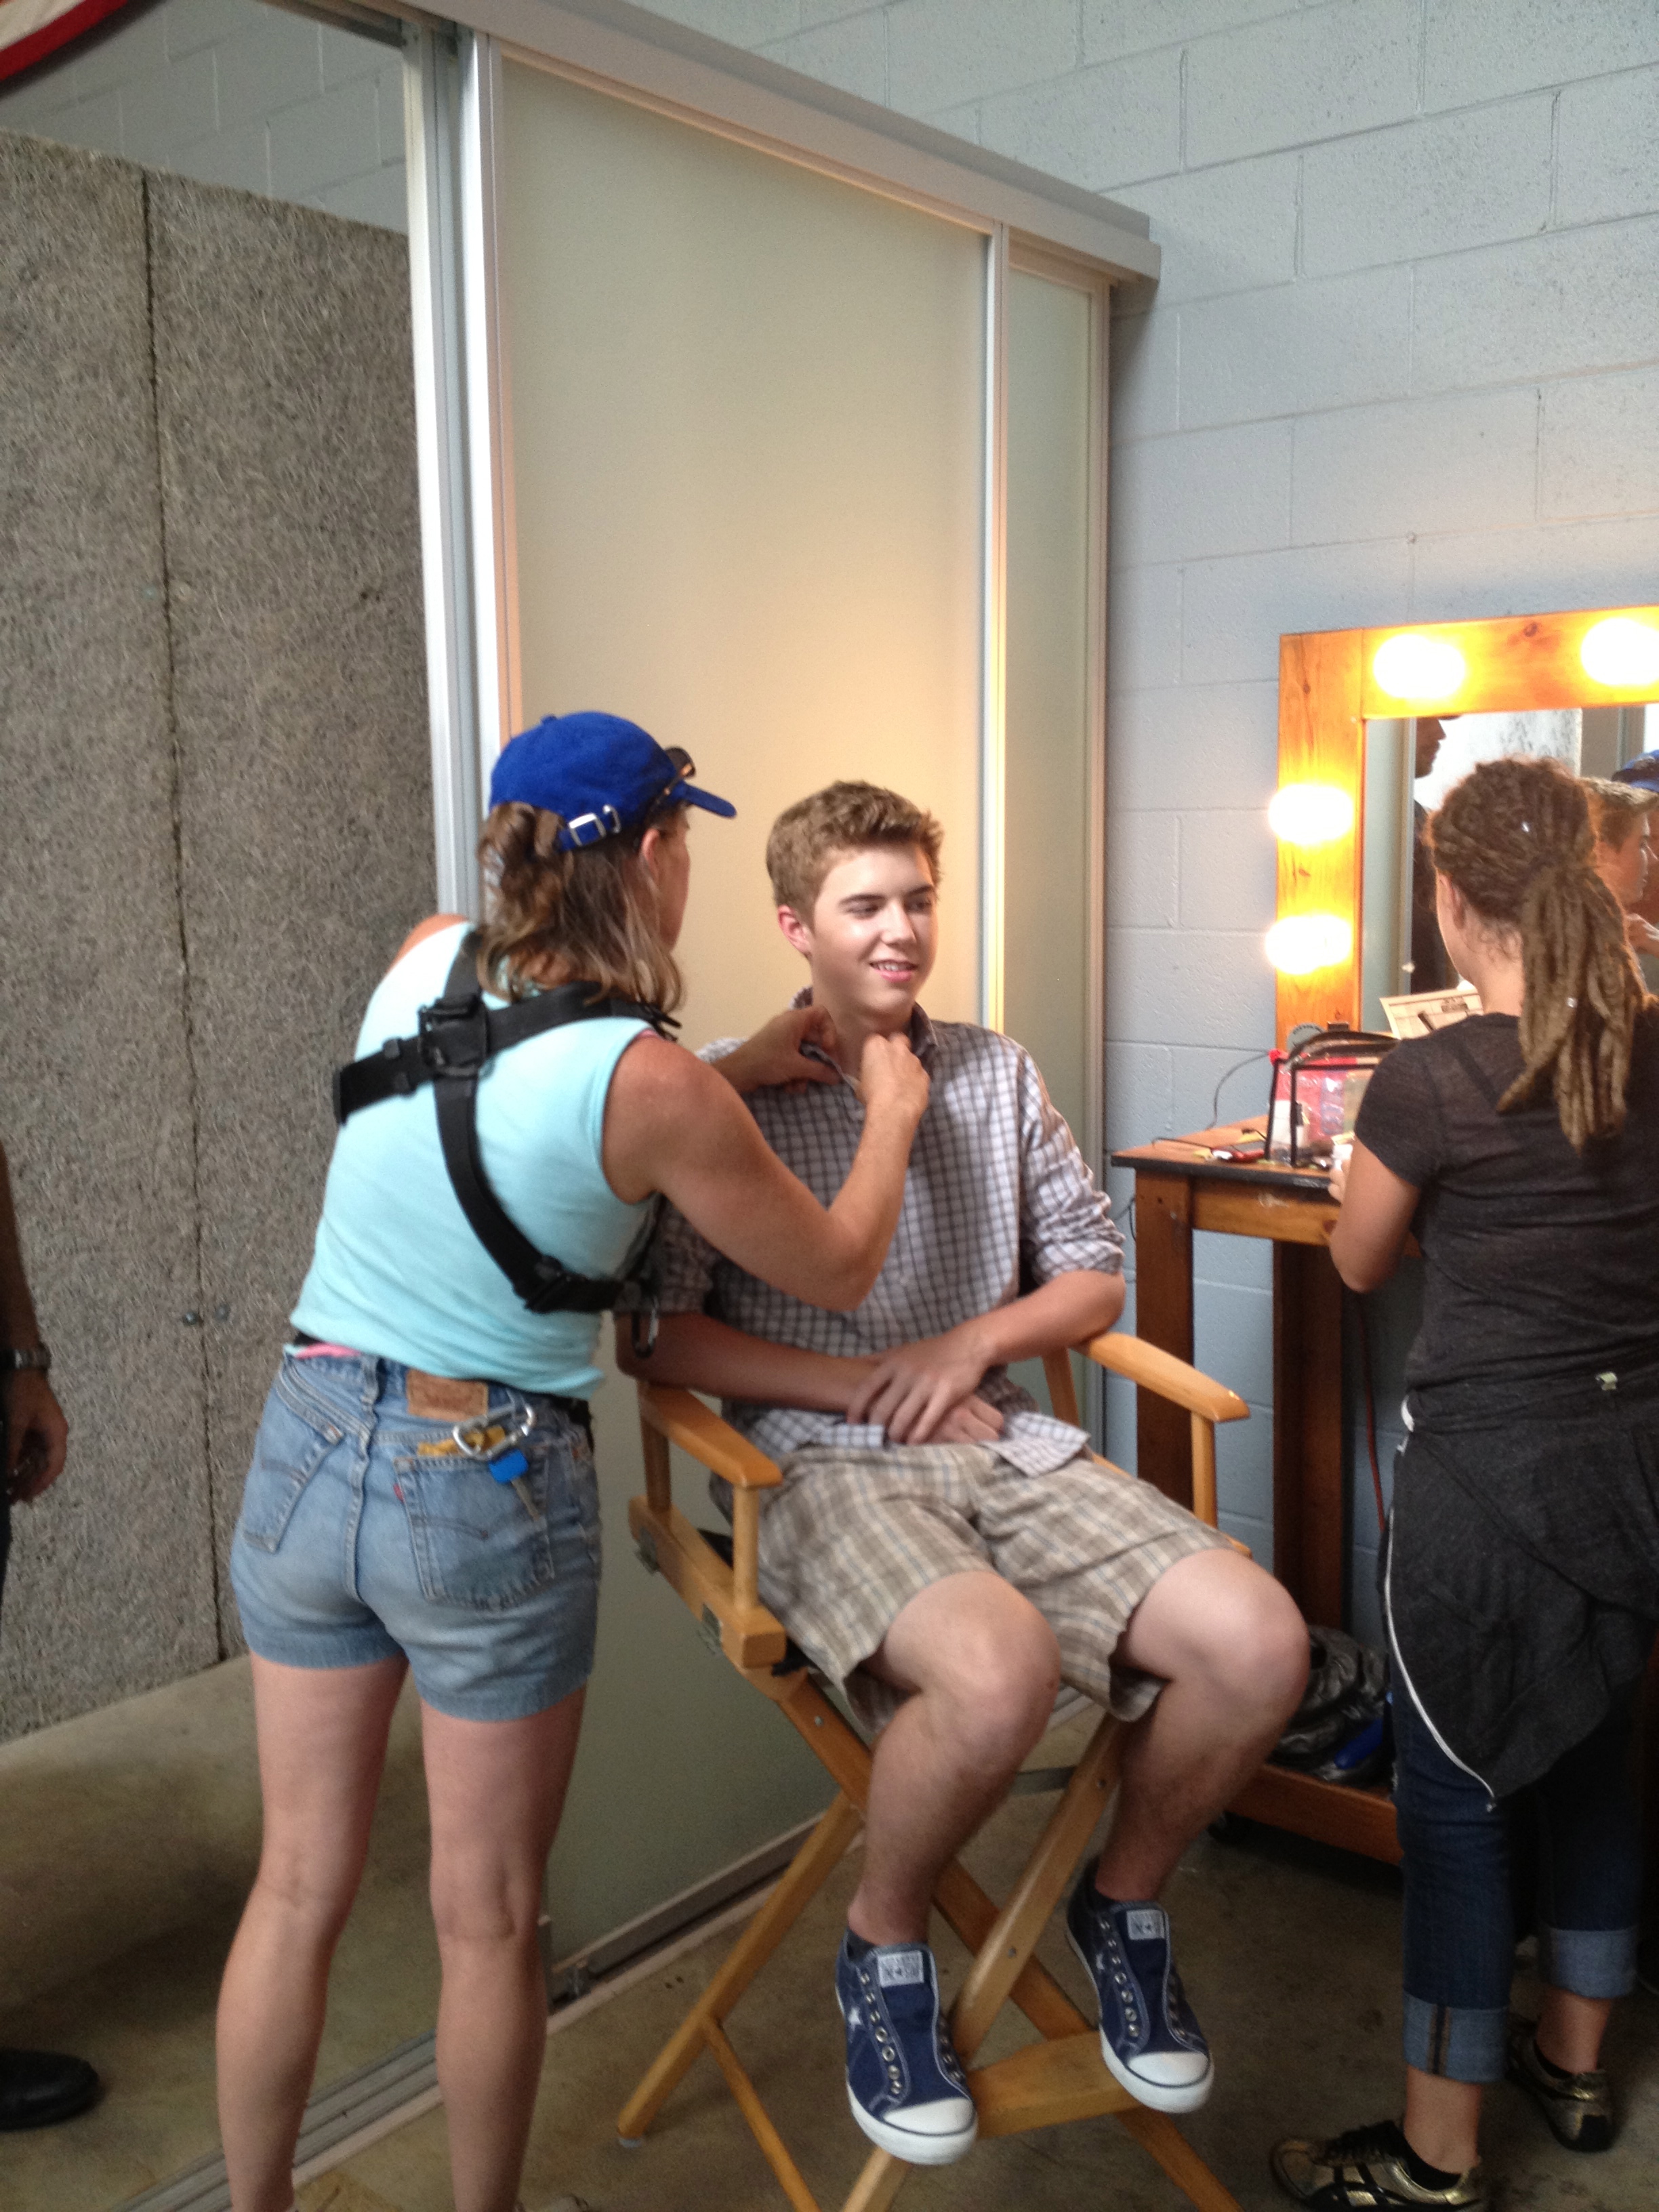 Alex Reininga getting make up done and getting his mic put on at the same time